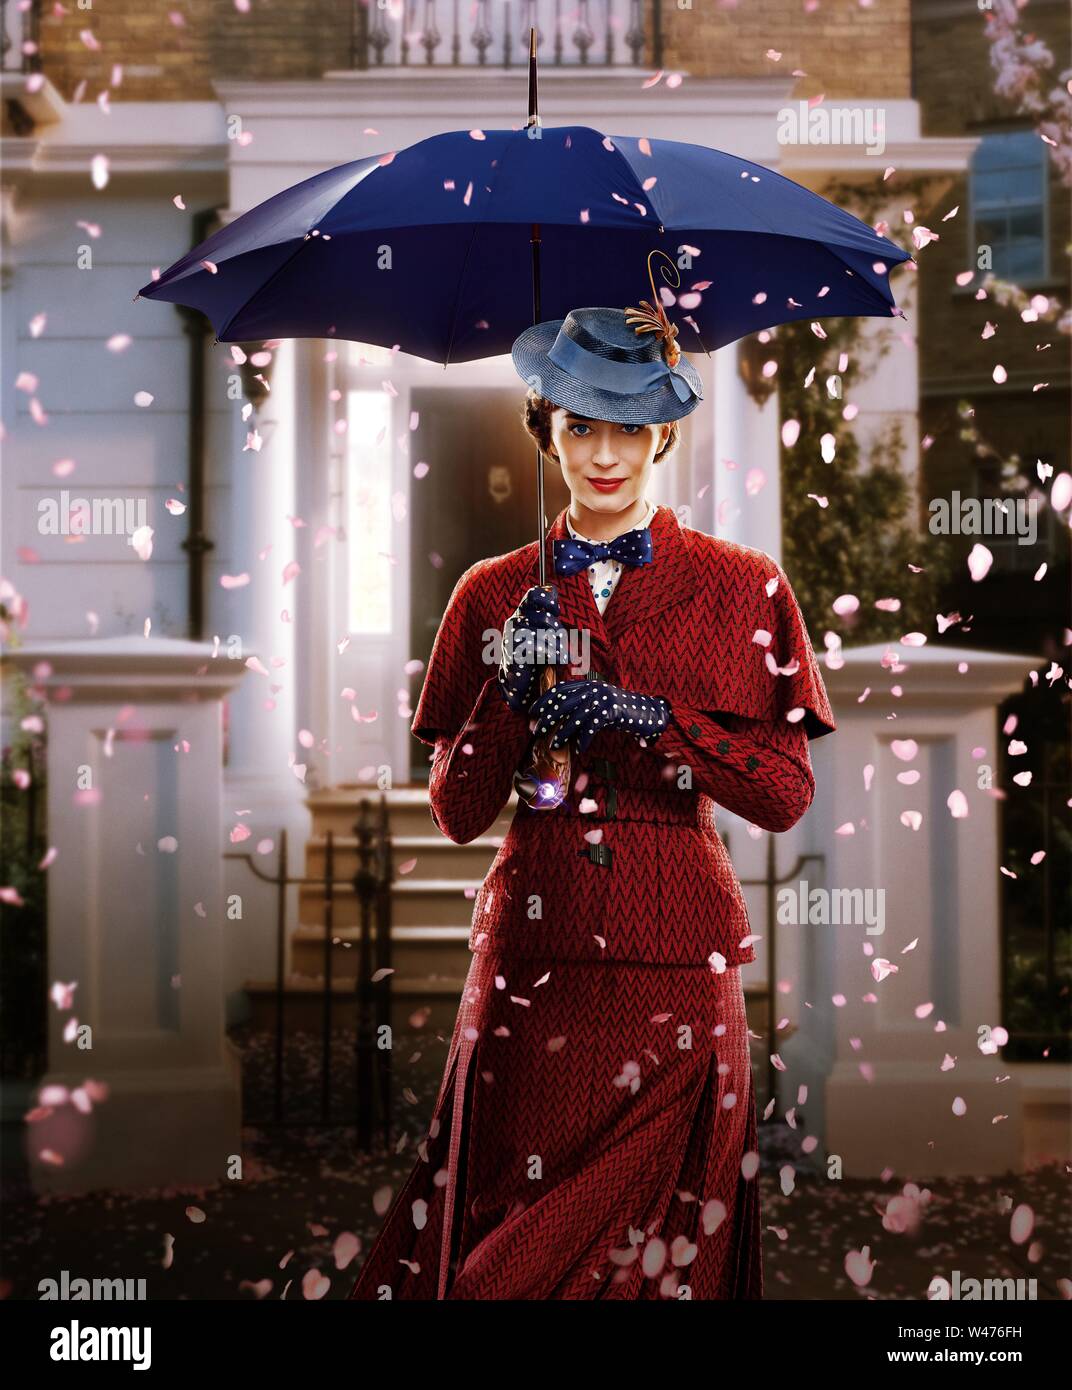 EMILY BLUNT in MARY POPPINS RETURNS (2018), directed by ROB MARSHALL. Credit: LUCAMAR PRODUCTIONS/MARC PLATT PRODUCTIONS/WALT DISNEY / Album Stock Photo